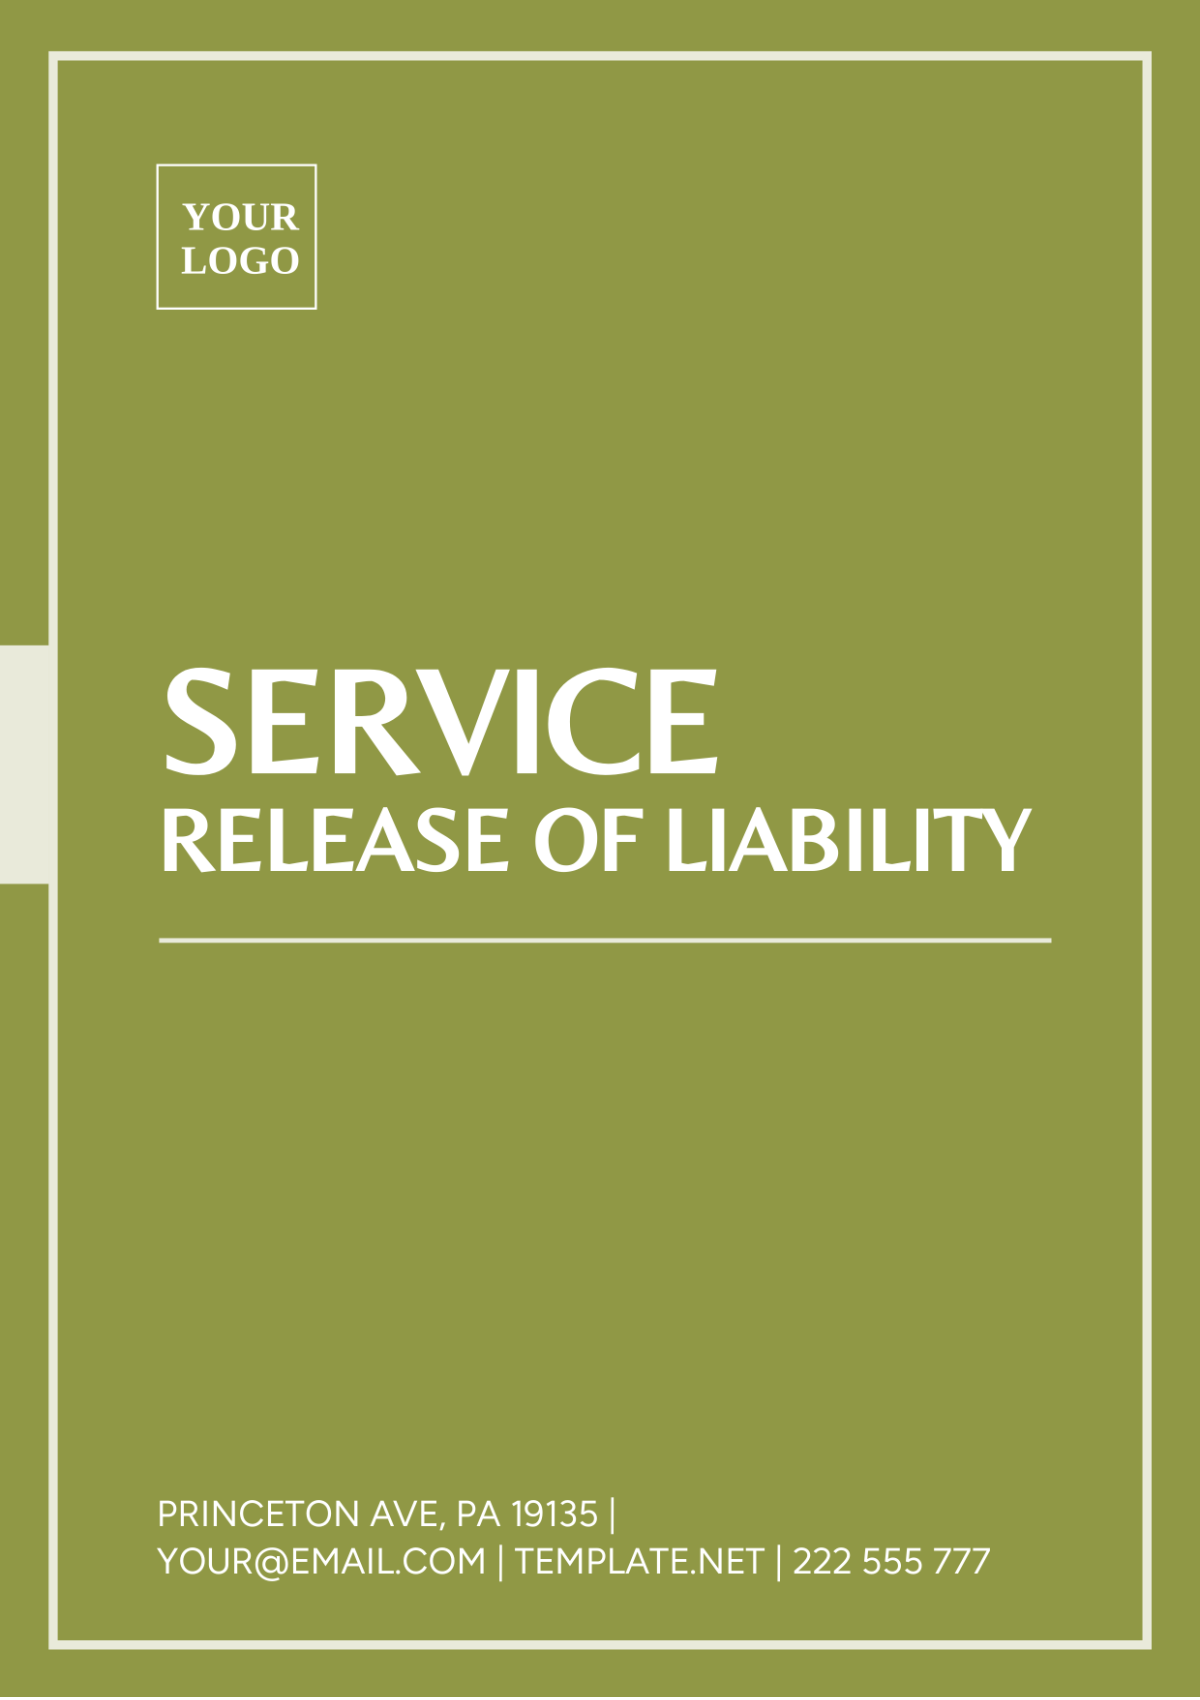 Services Release of Liability Template